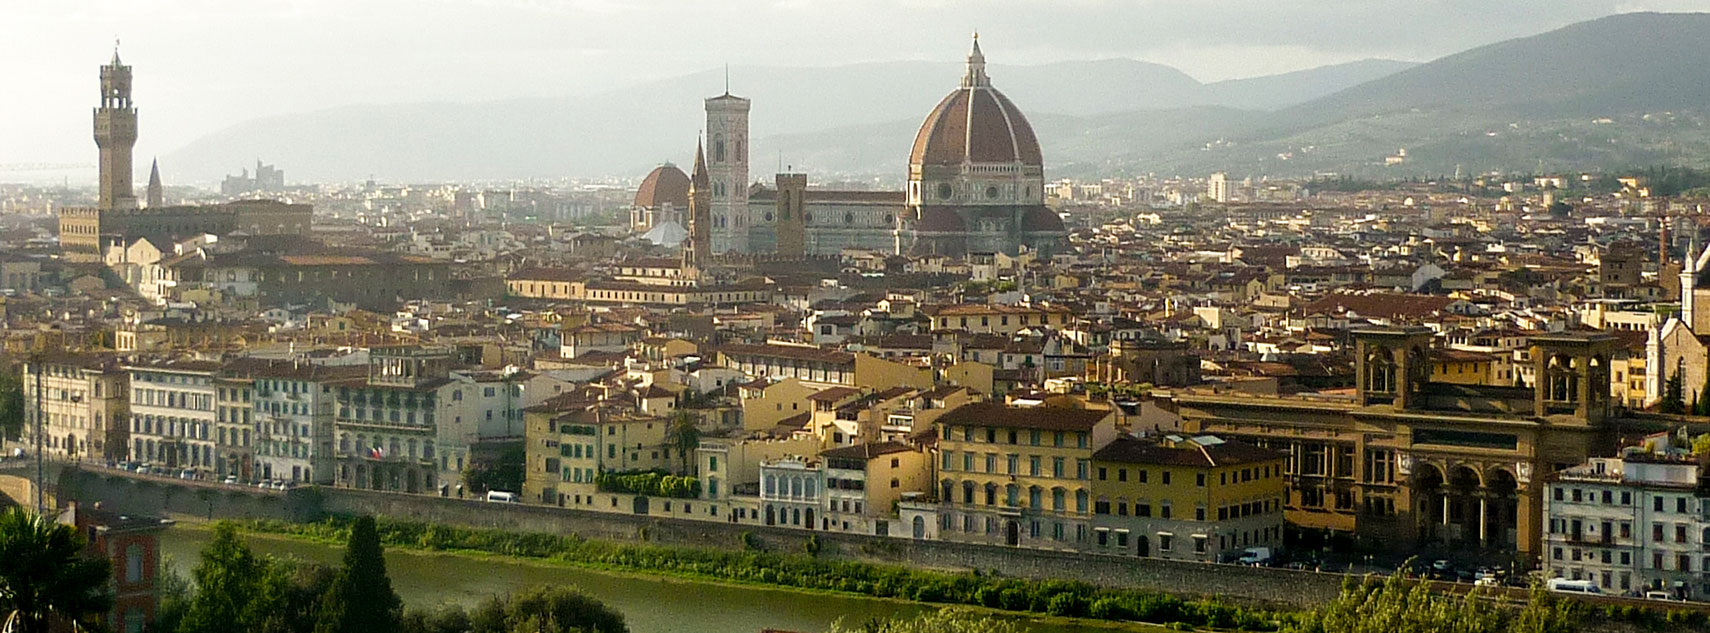 Historic Center of Florence from Piazzale Michelangelo